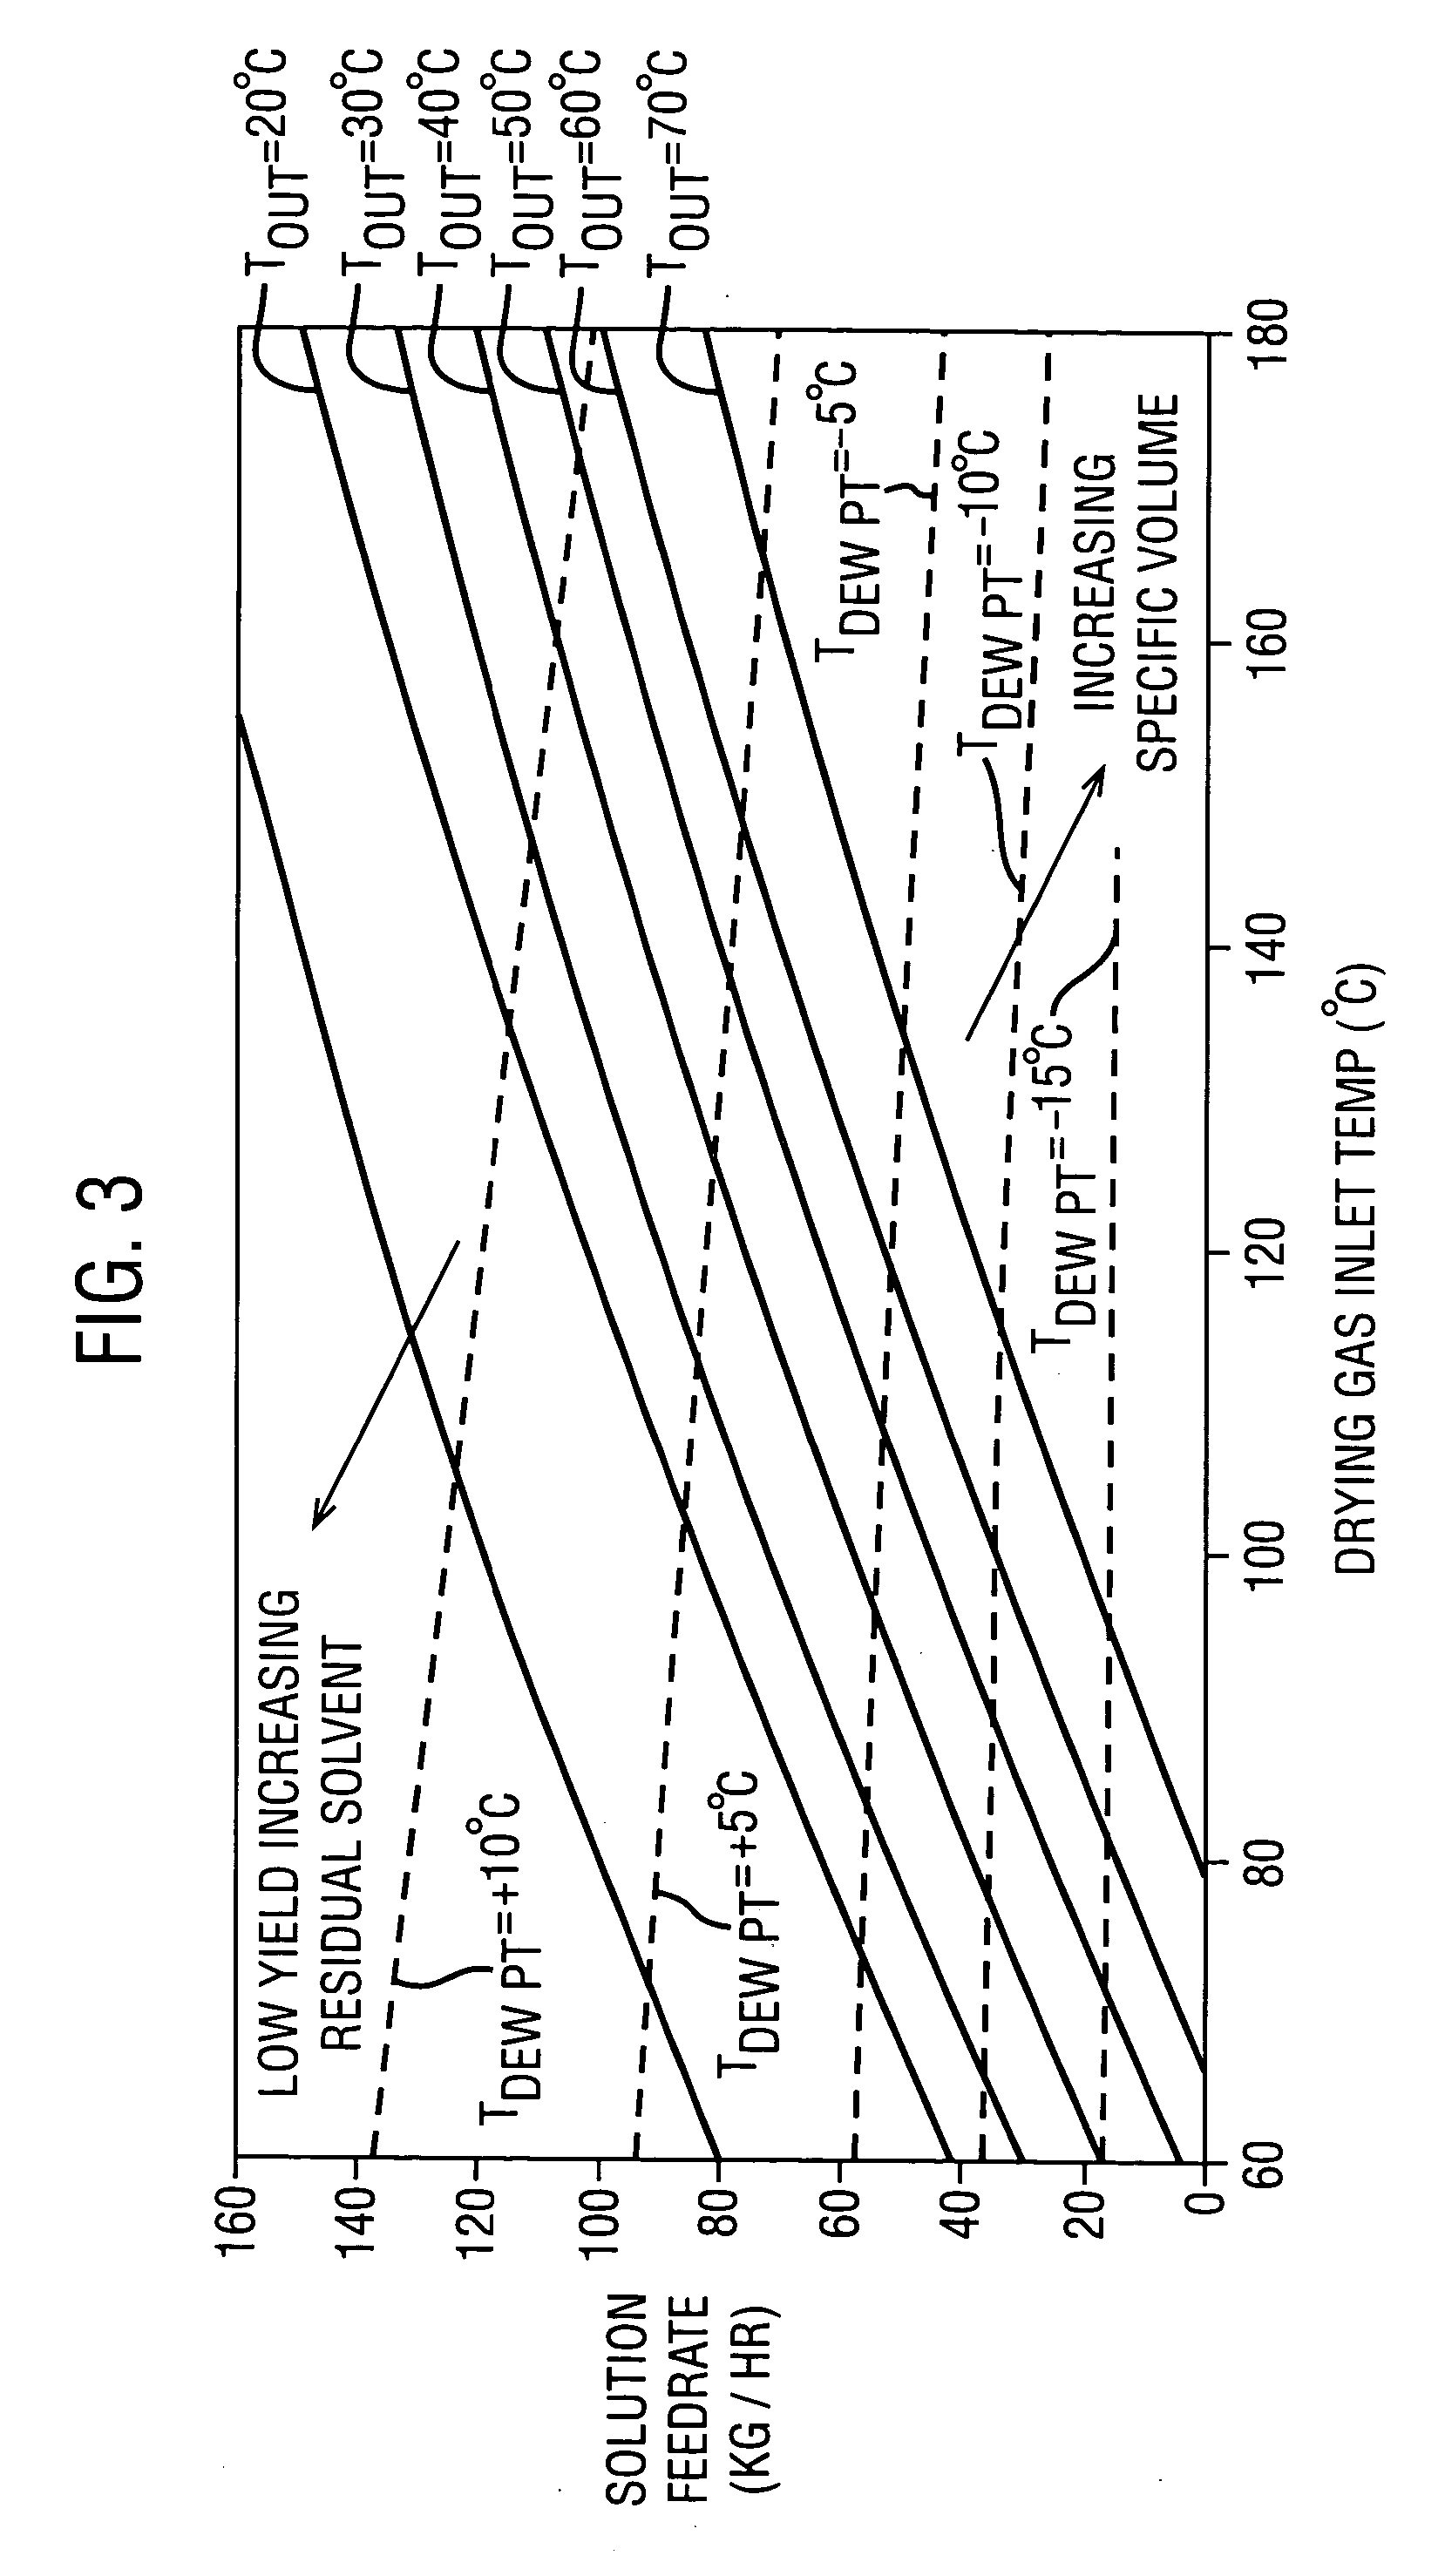 Spray drying processes for forming solid amorphous dispersions of drugs and polymers